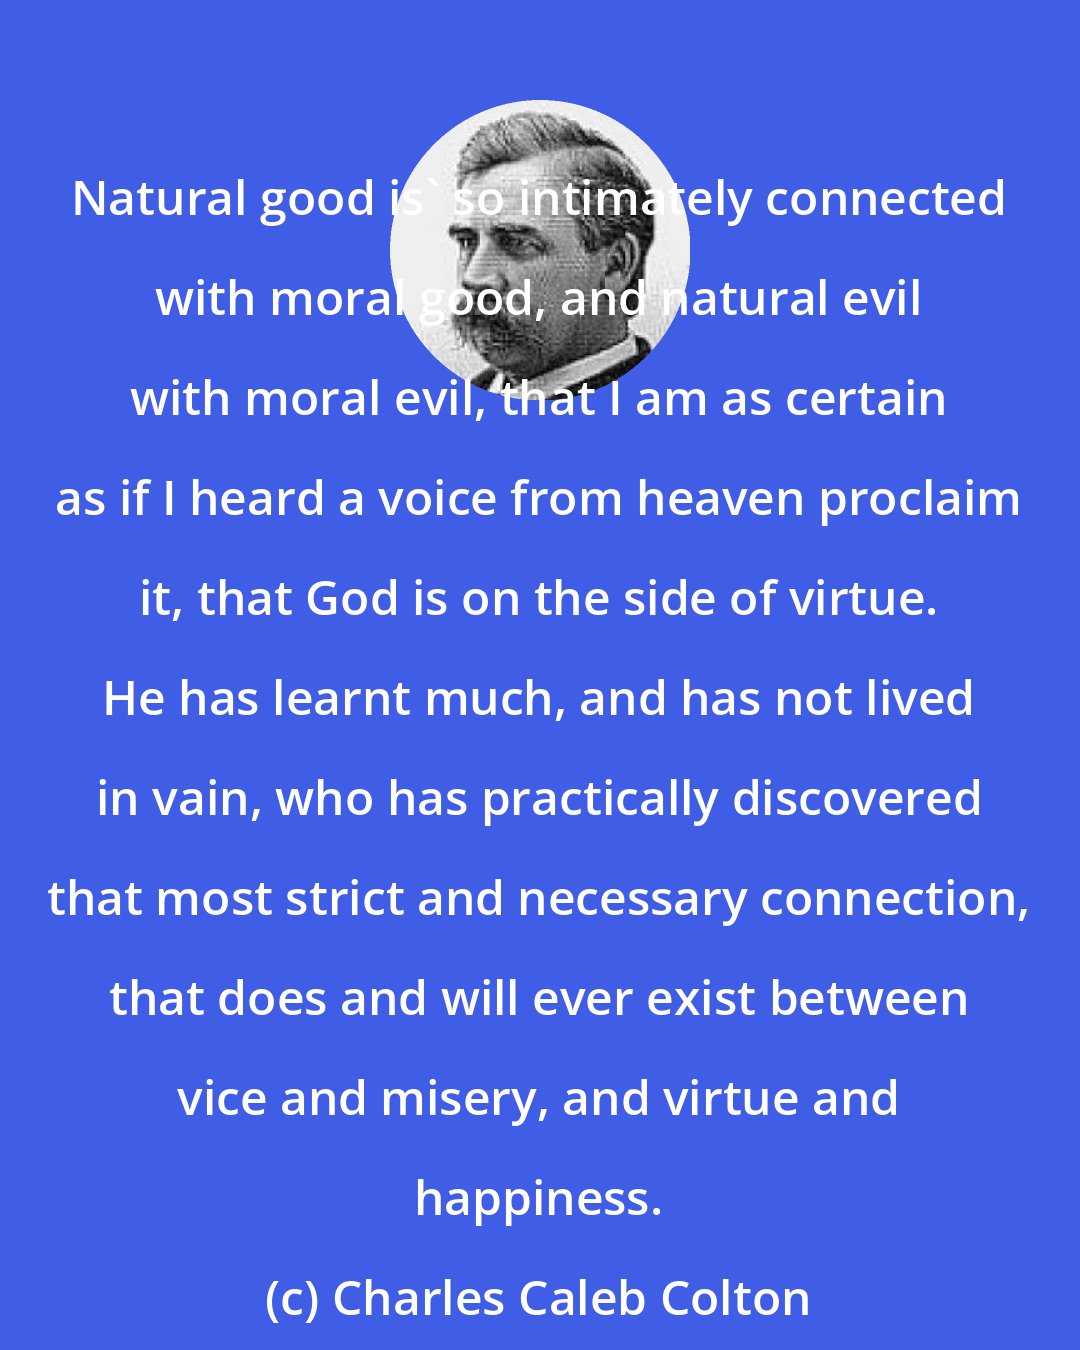 Charles Caleb Colton: Natural good is' so intimately connected with moral good, and natural evil with moral evil, that I am as certain as if I heard a voice from heaven proclaim it, that God is on the side of virtue. He has learnt much, and has not lived in vain, who has practically discovered that most strict and necessary connection, that does and will ever exist between vice and misery, and virtue and happiness.